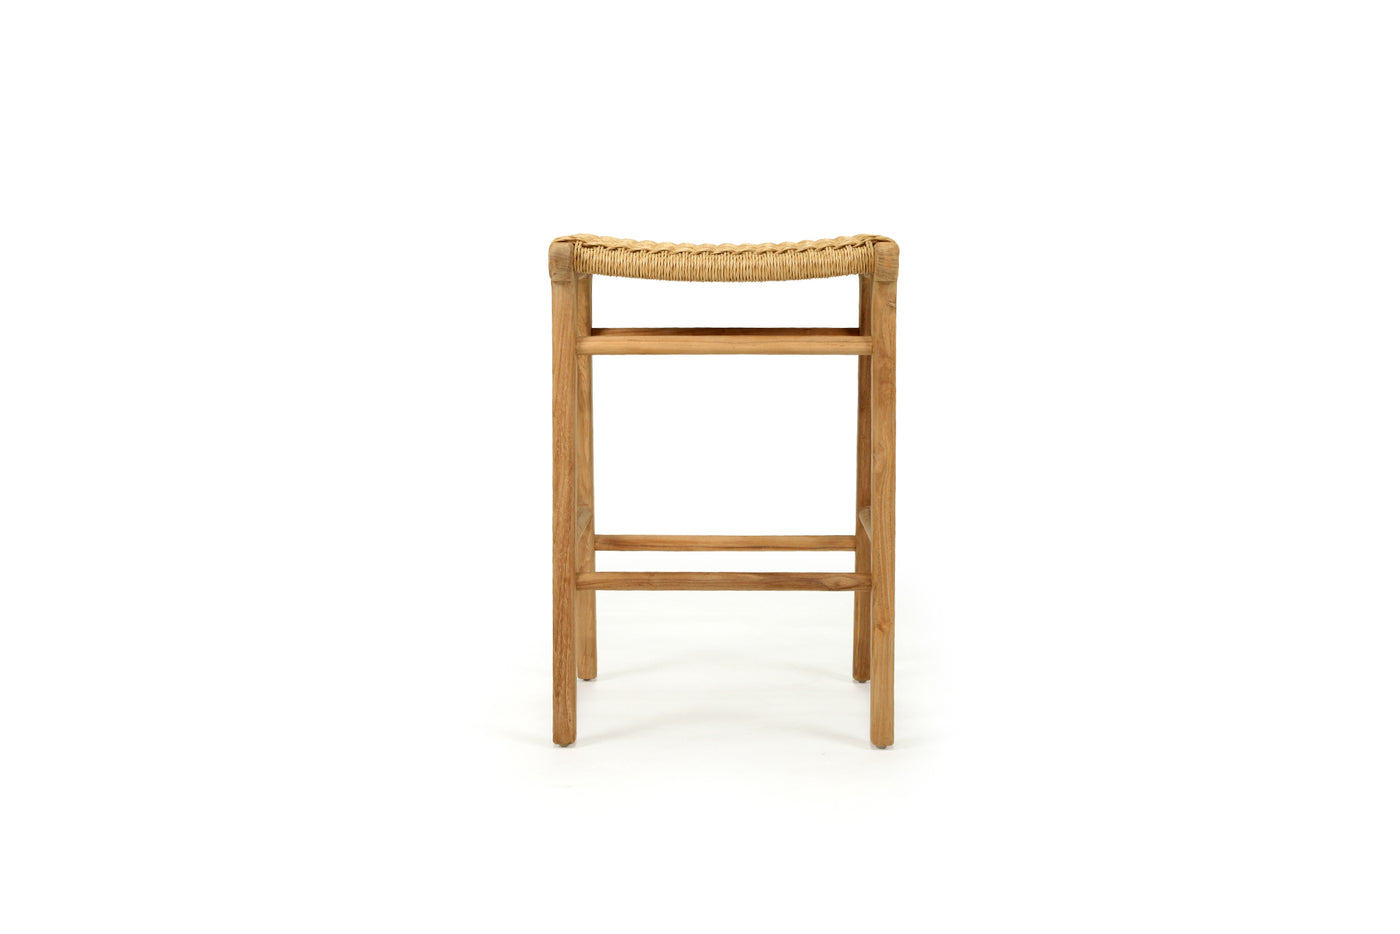 Zen Backless Counter Stool - Sand (Close Weave)